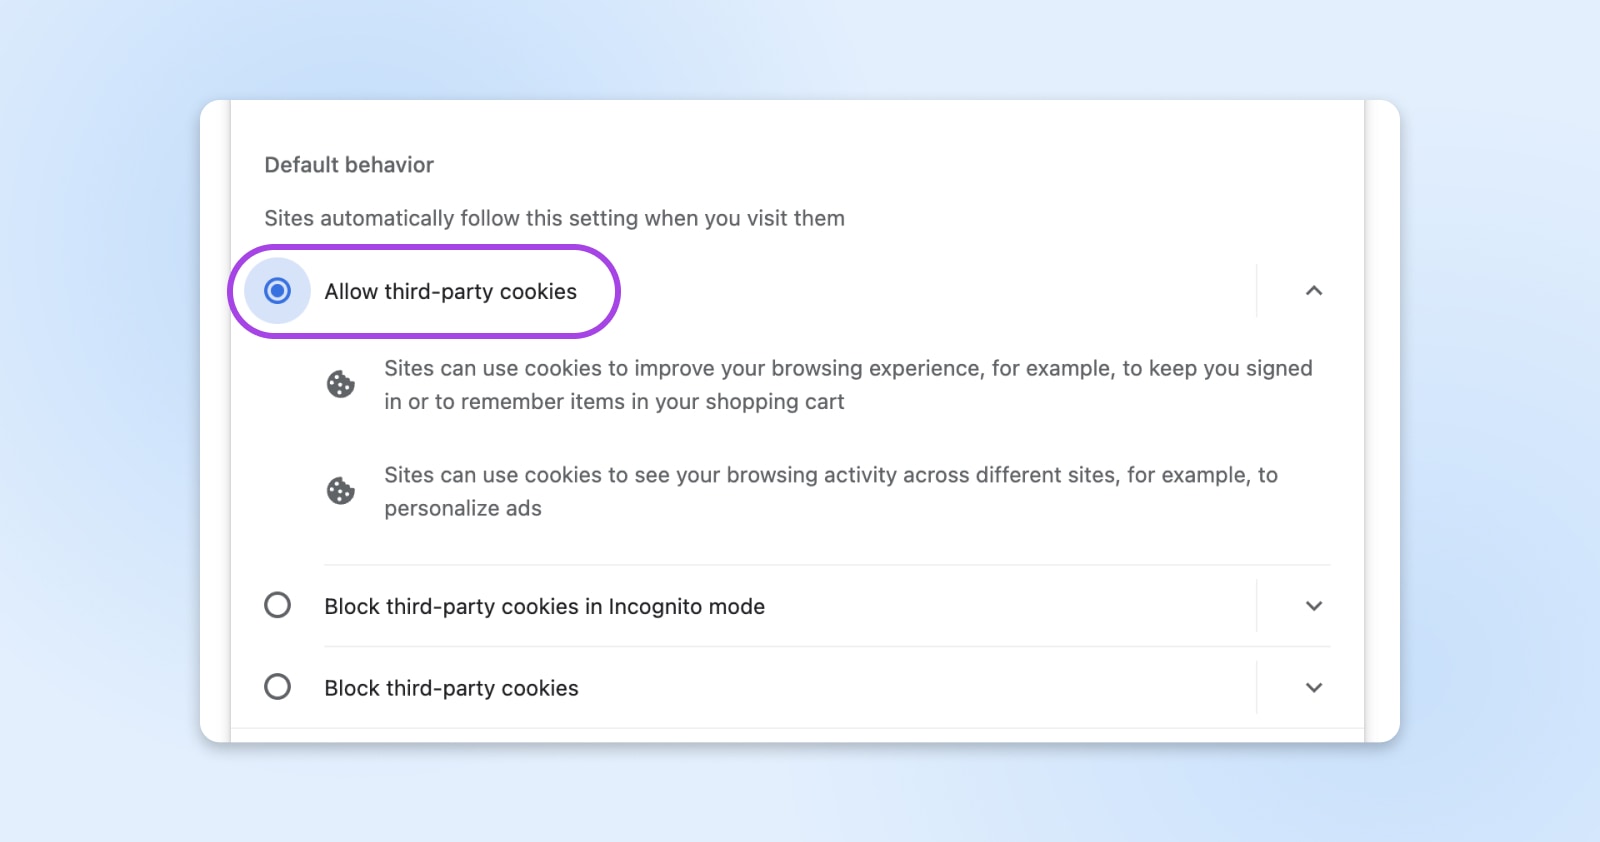 Chrome's 'Default behavior' dialog box with the 'Allow third-party cookies' option selected.